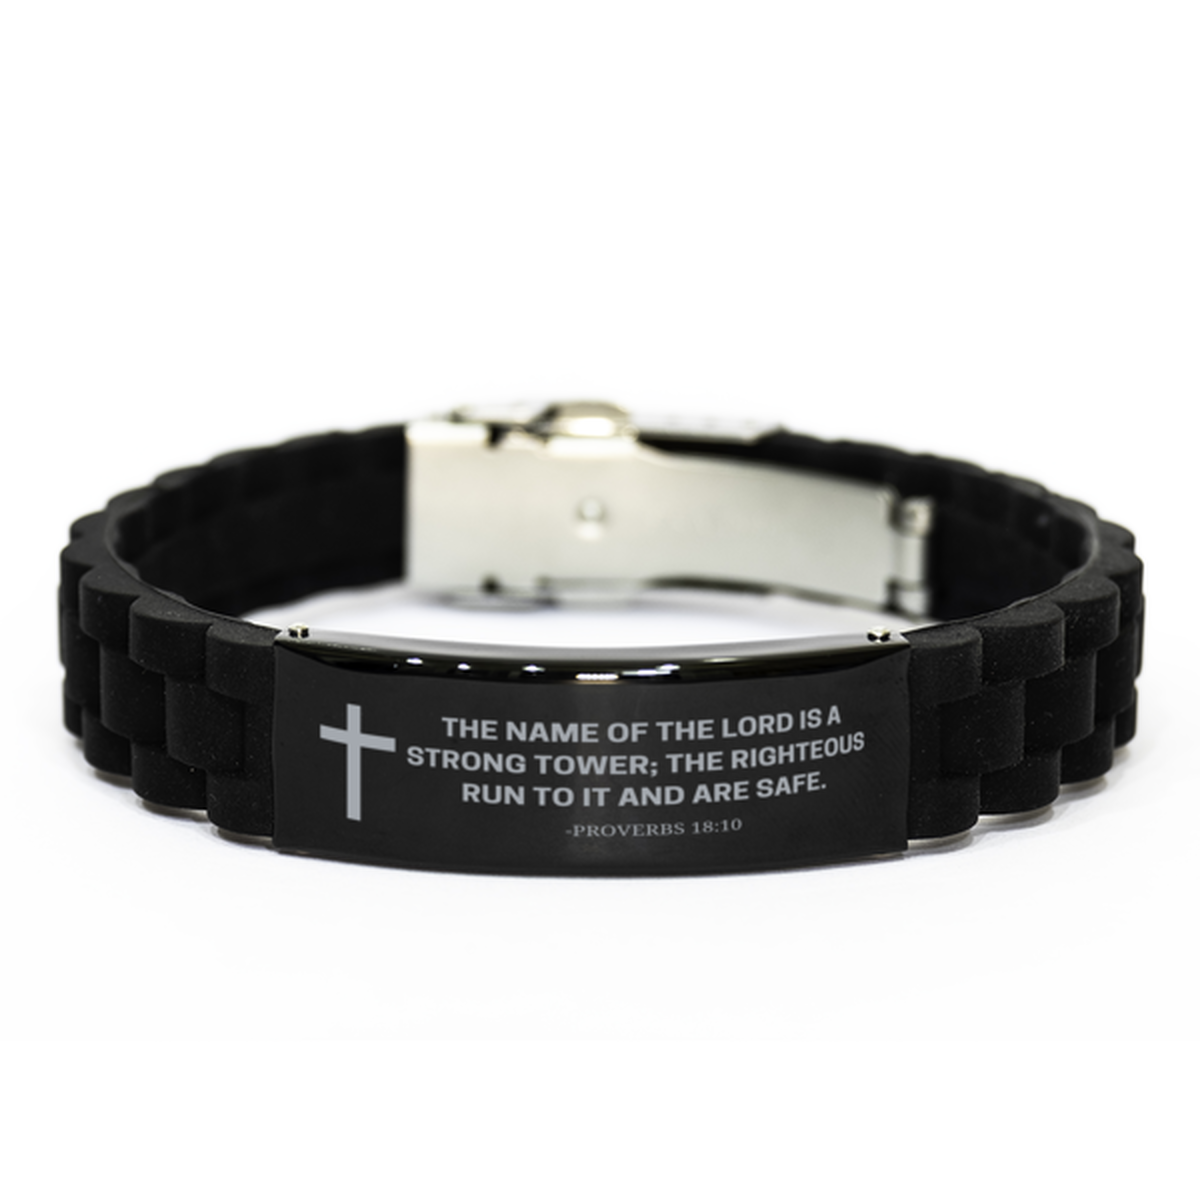 Baptism Gifts For Teenage Boys Girls, Christian Bible Verse Black Glidelock Clasp Bracelet, The name of the Lord is a strong, Catholic Confirmation Gifts for Son, Godson, Grandson, Nephew